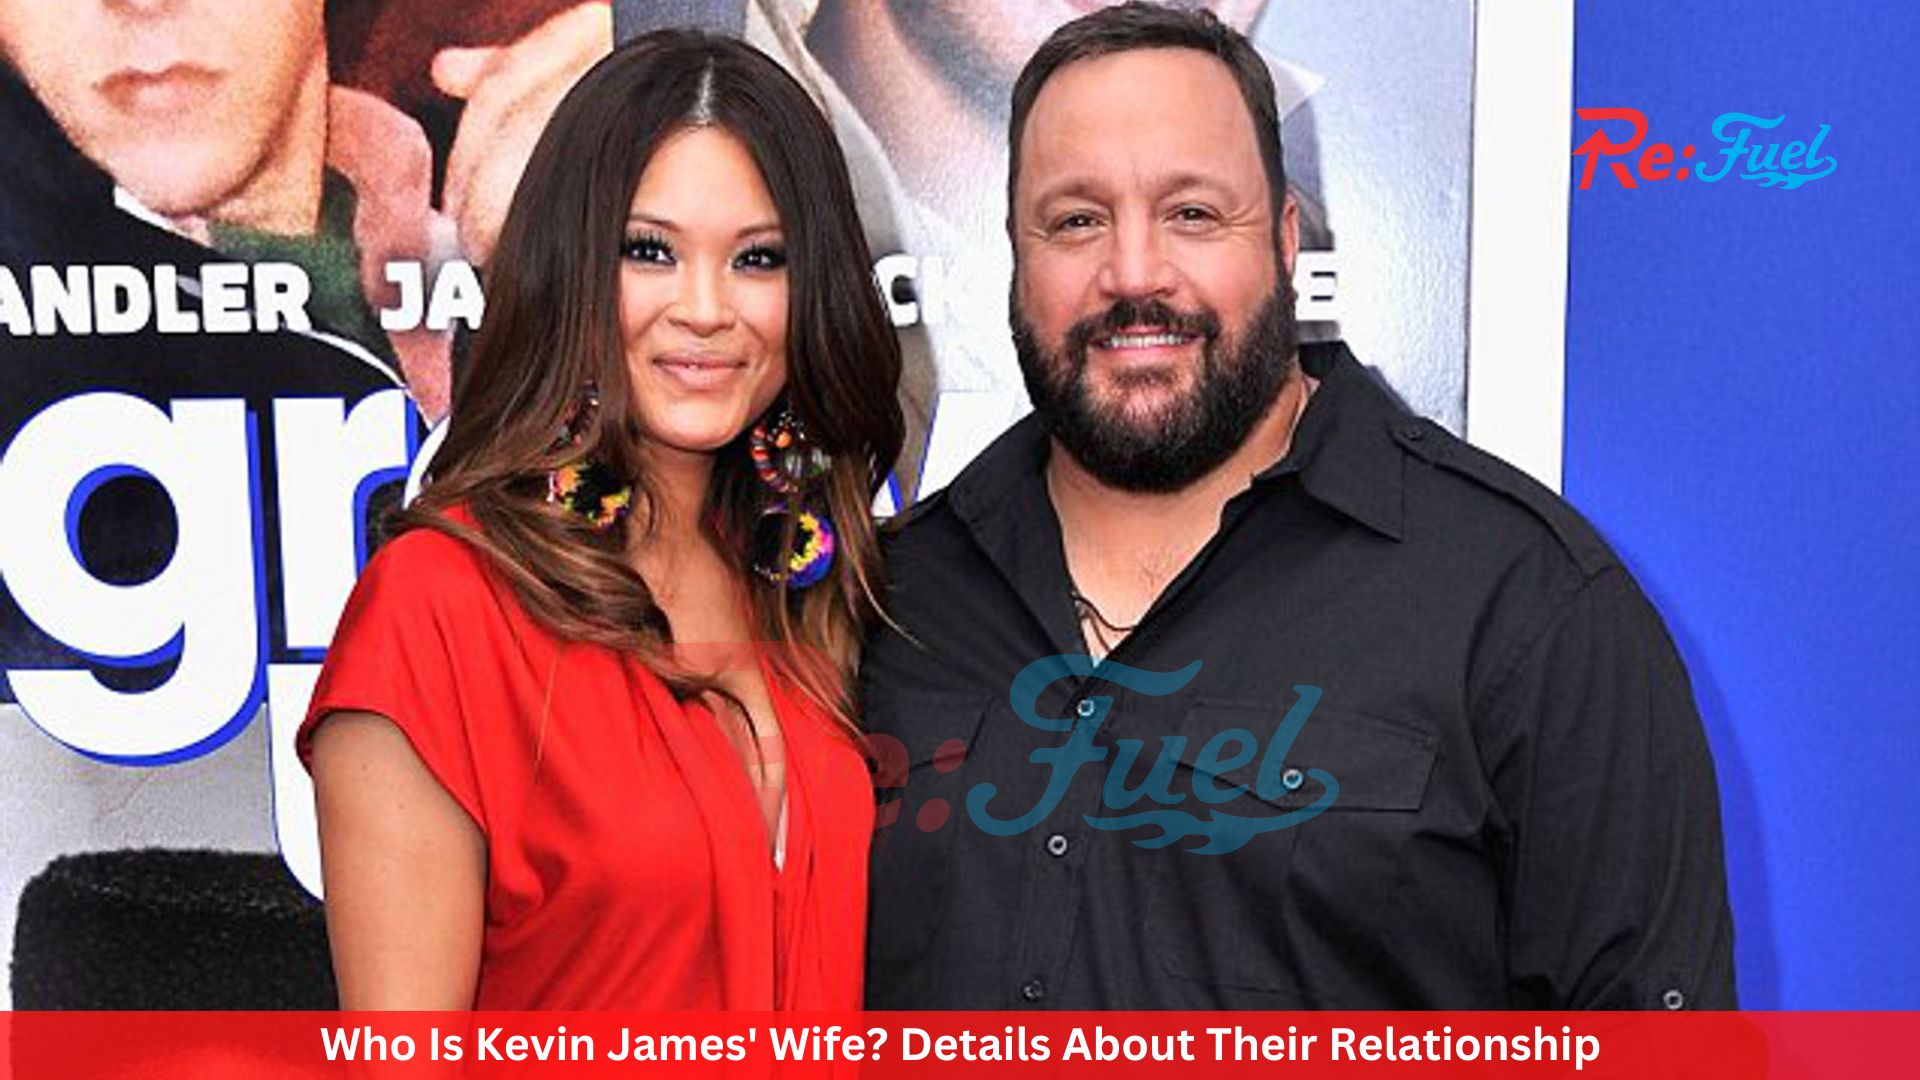 Who Is Kevin James' Wife? Details About Their Relationship